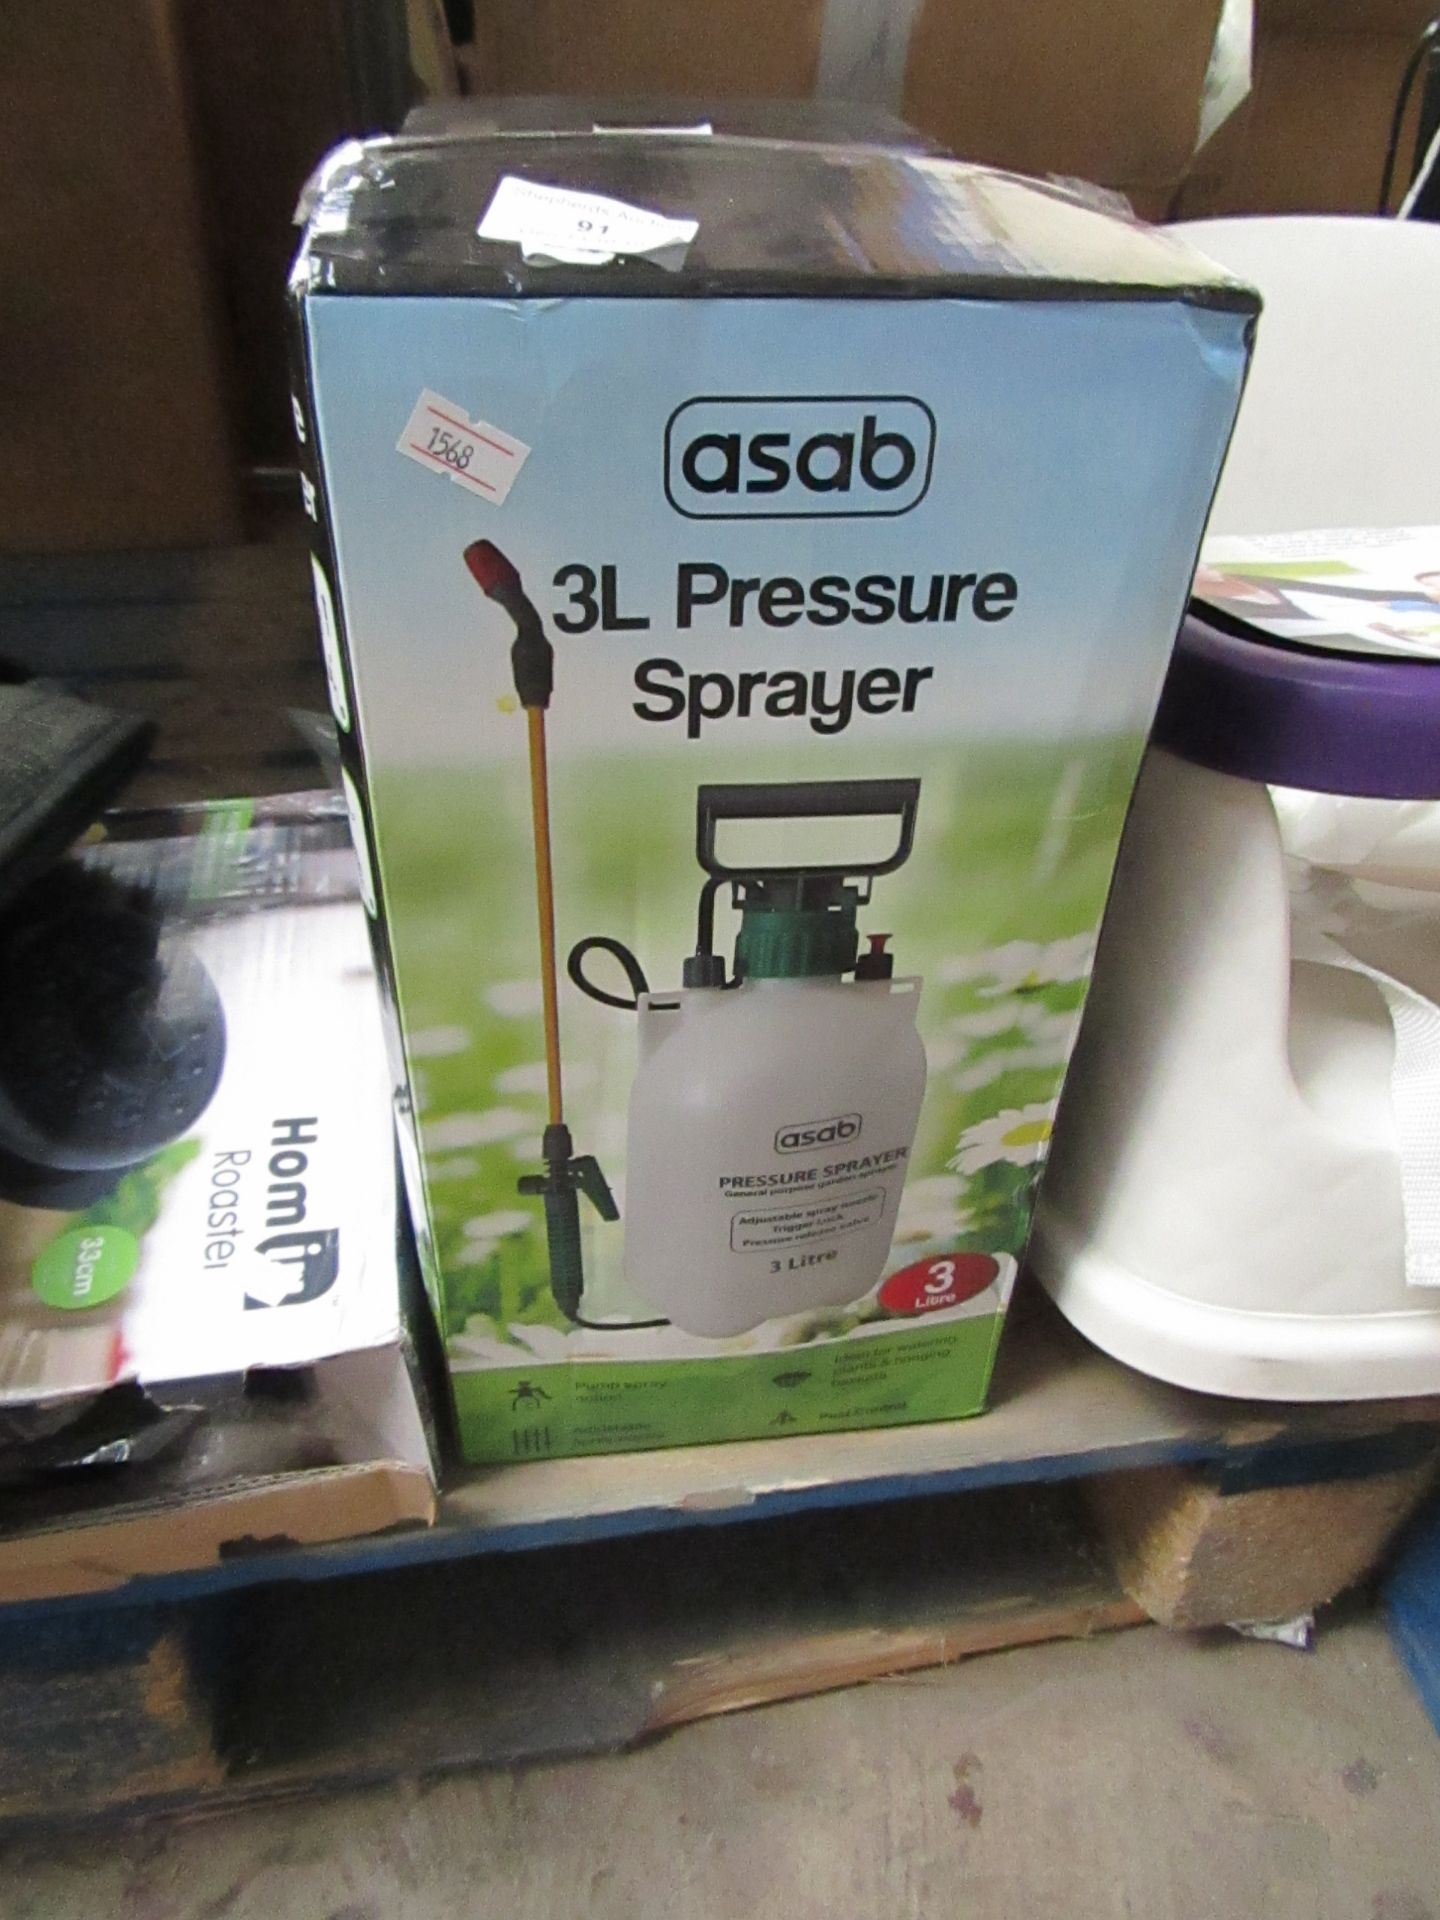 3L Pressure sprayer, unchecked and boxed.